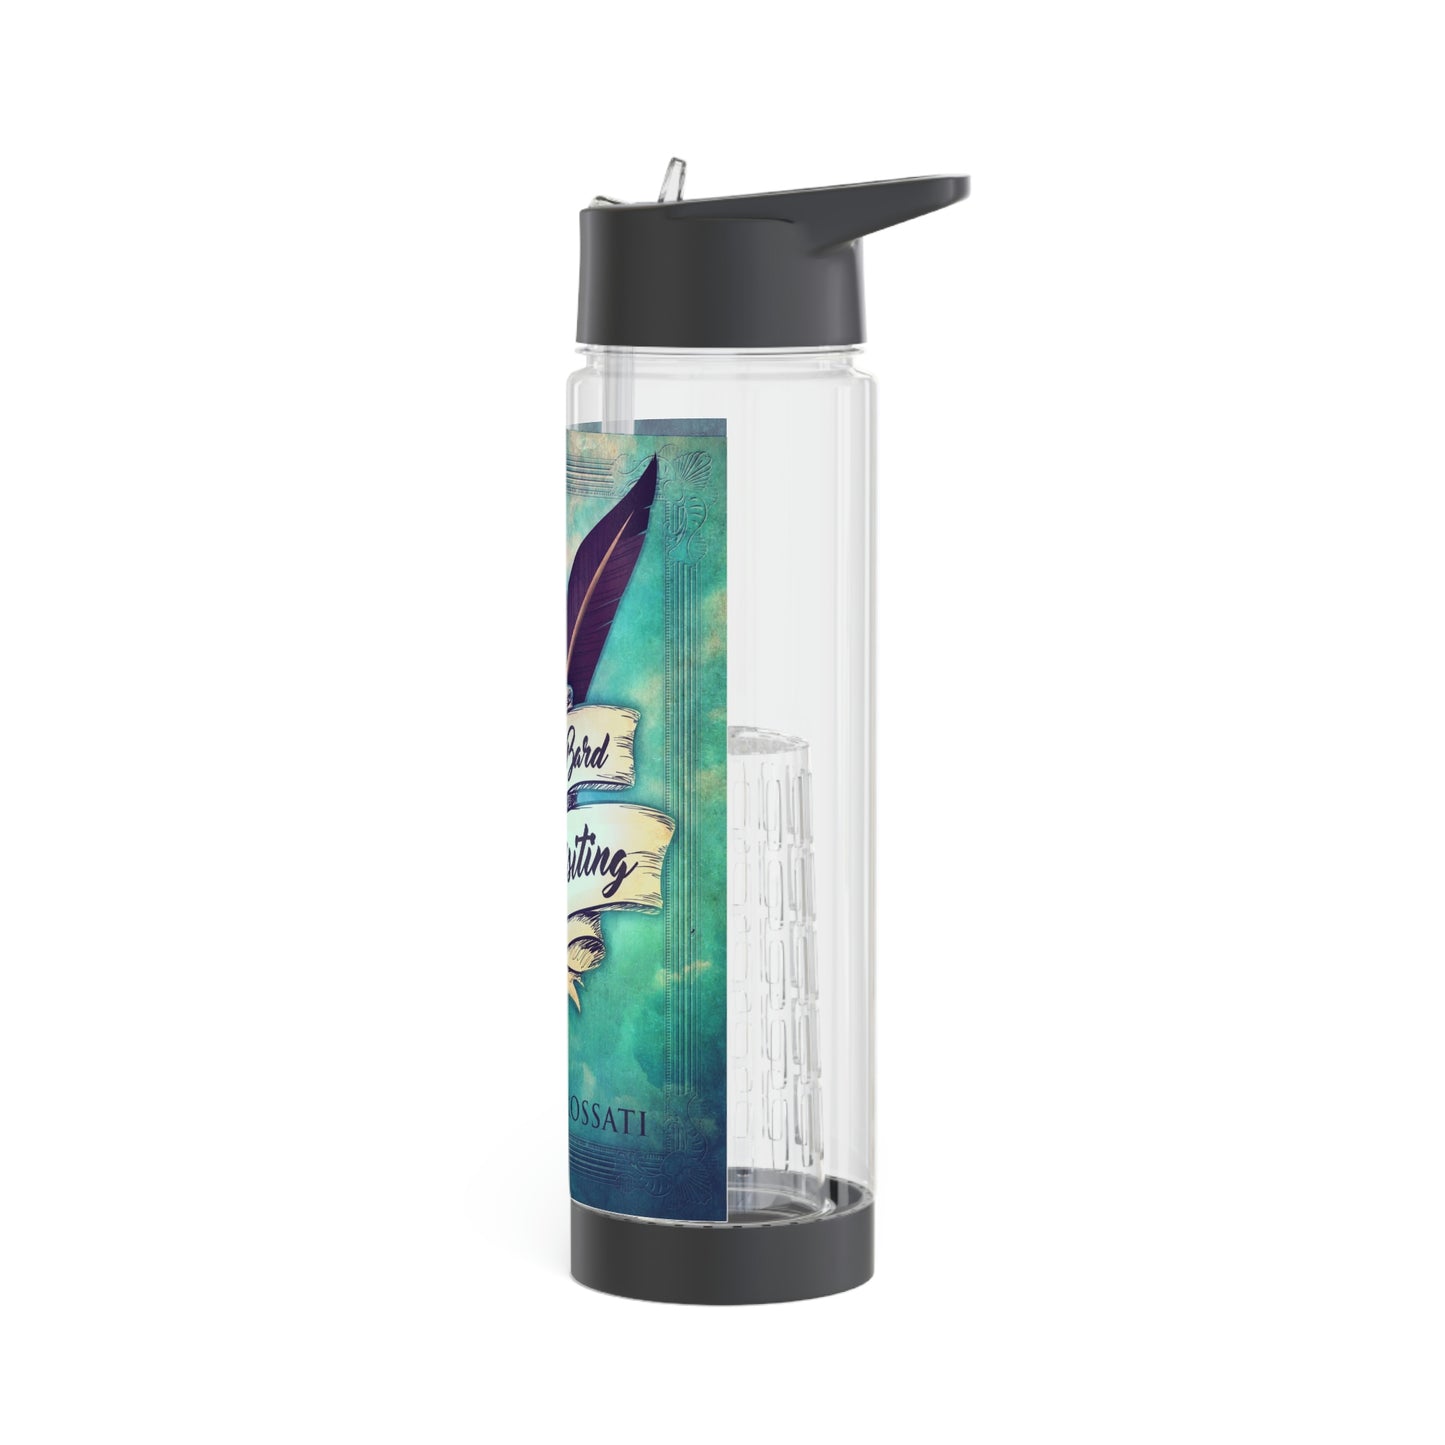 When The Bard Came Visiting - Infuser Water Bottle